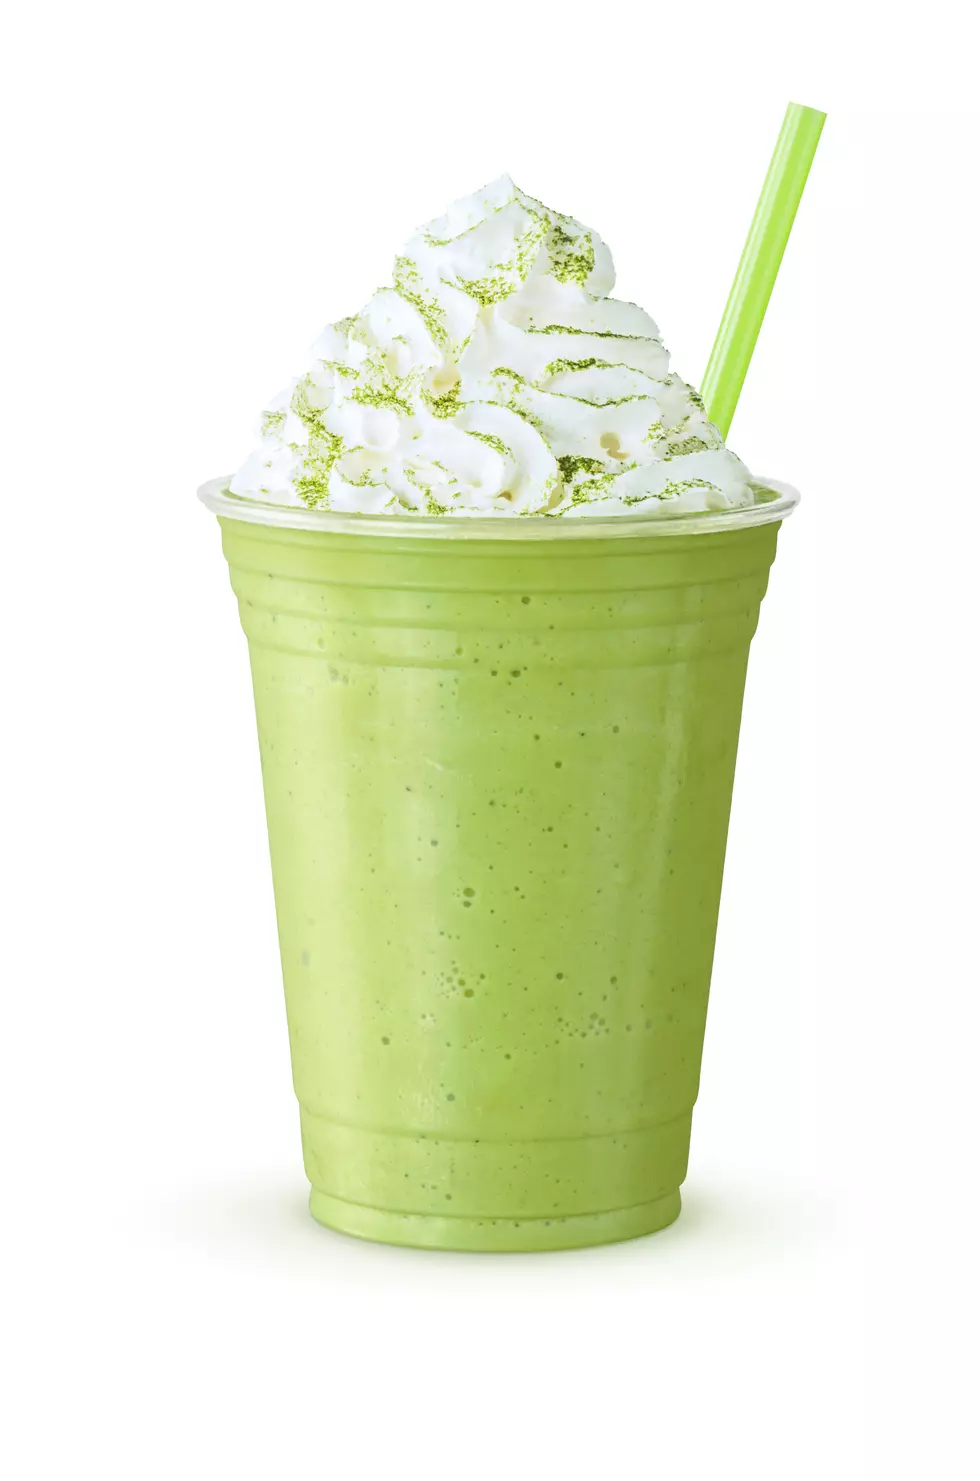 The Shamrock Drink Is Back At McDonald's